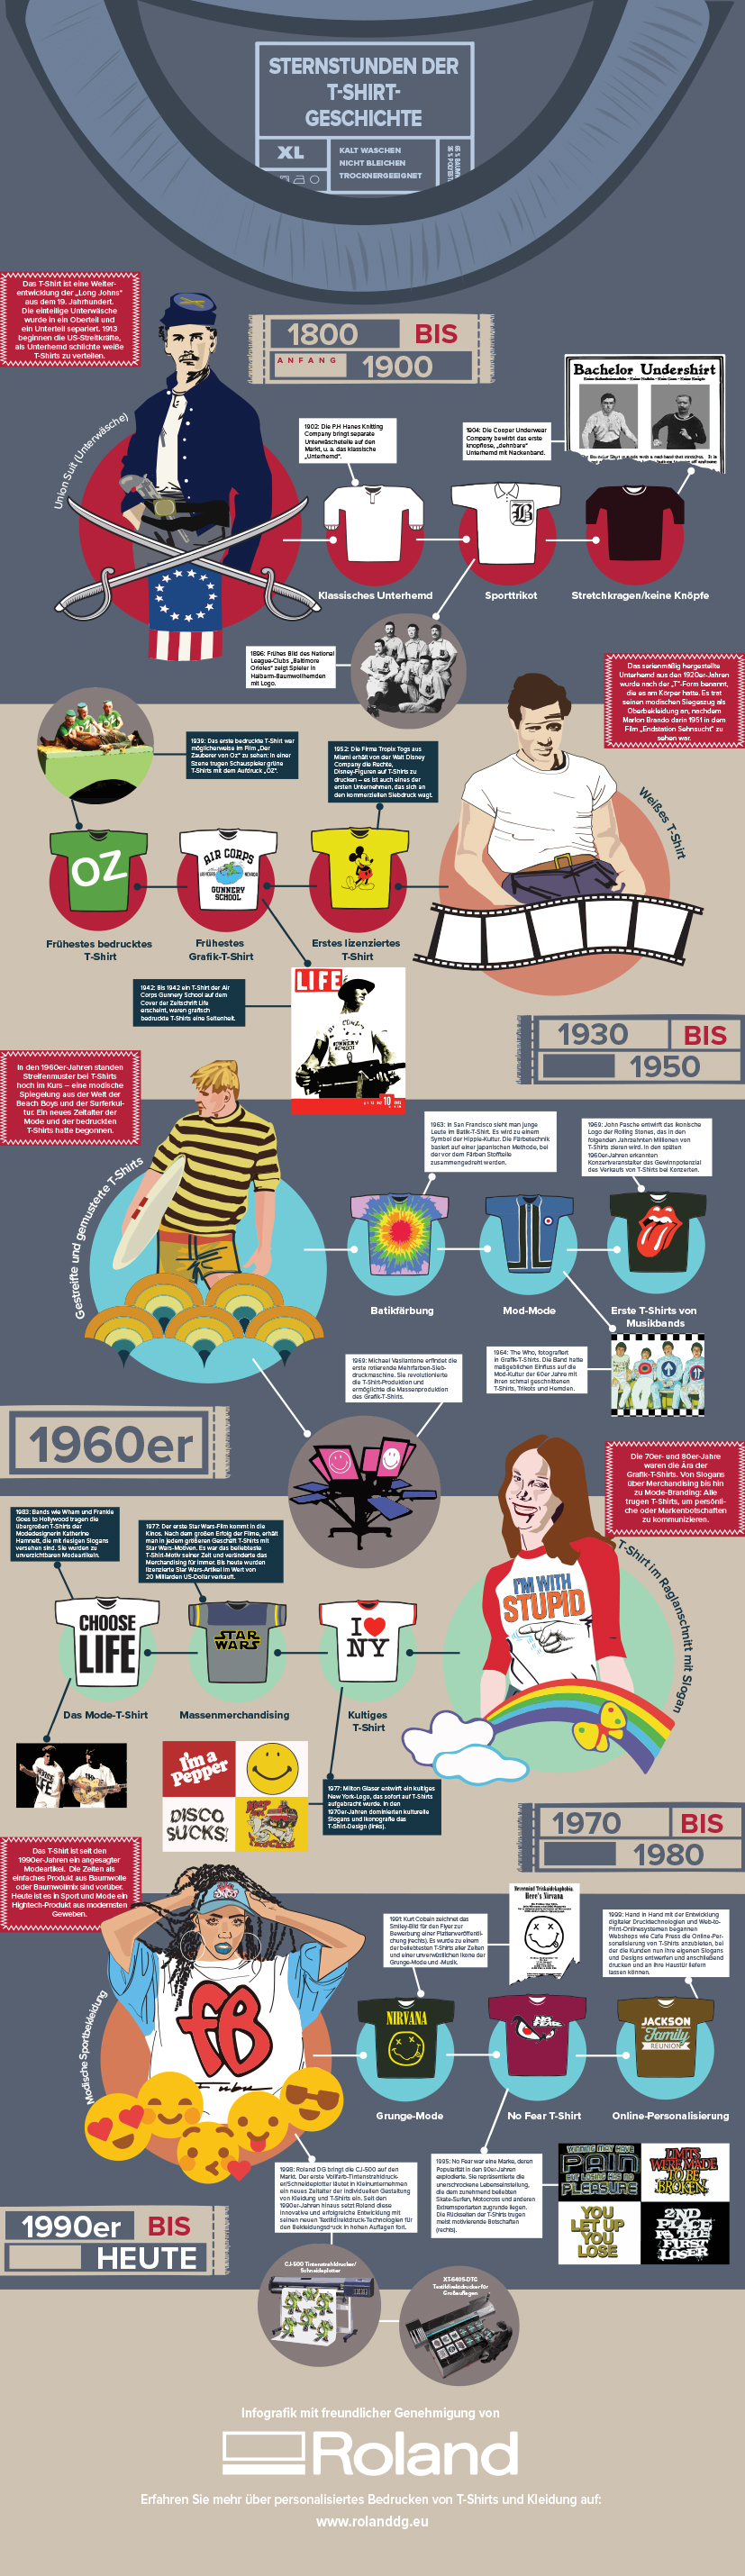 History Of the T-Shirt